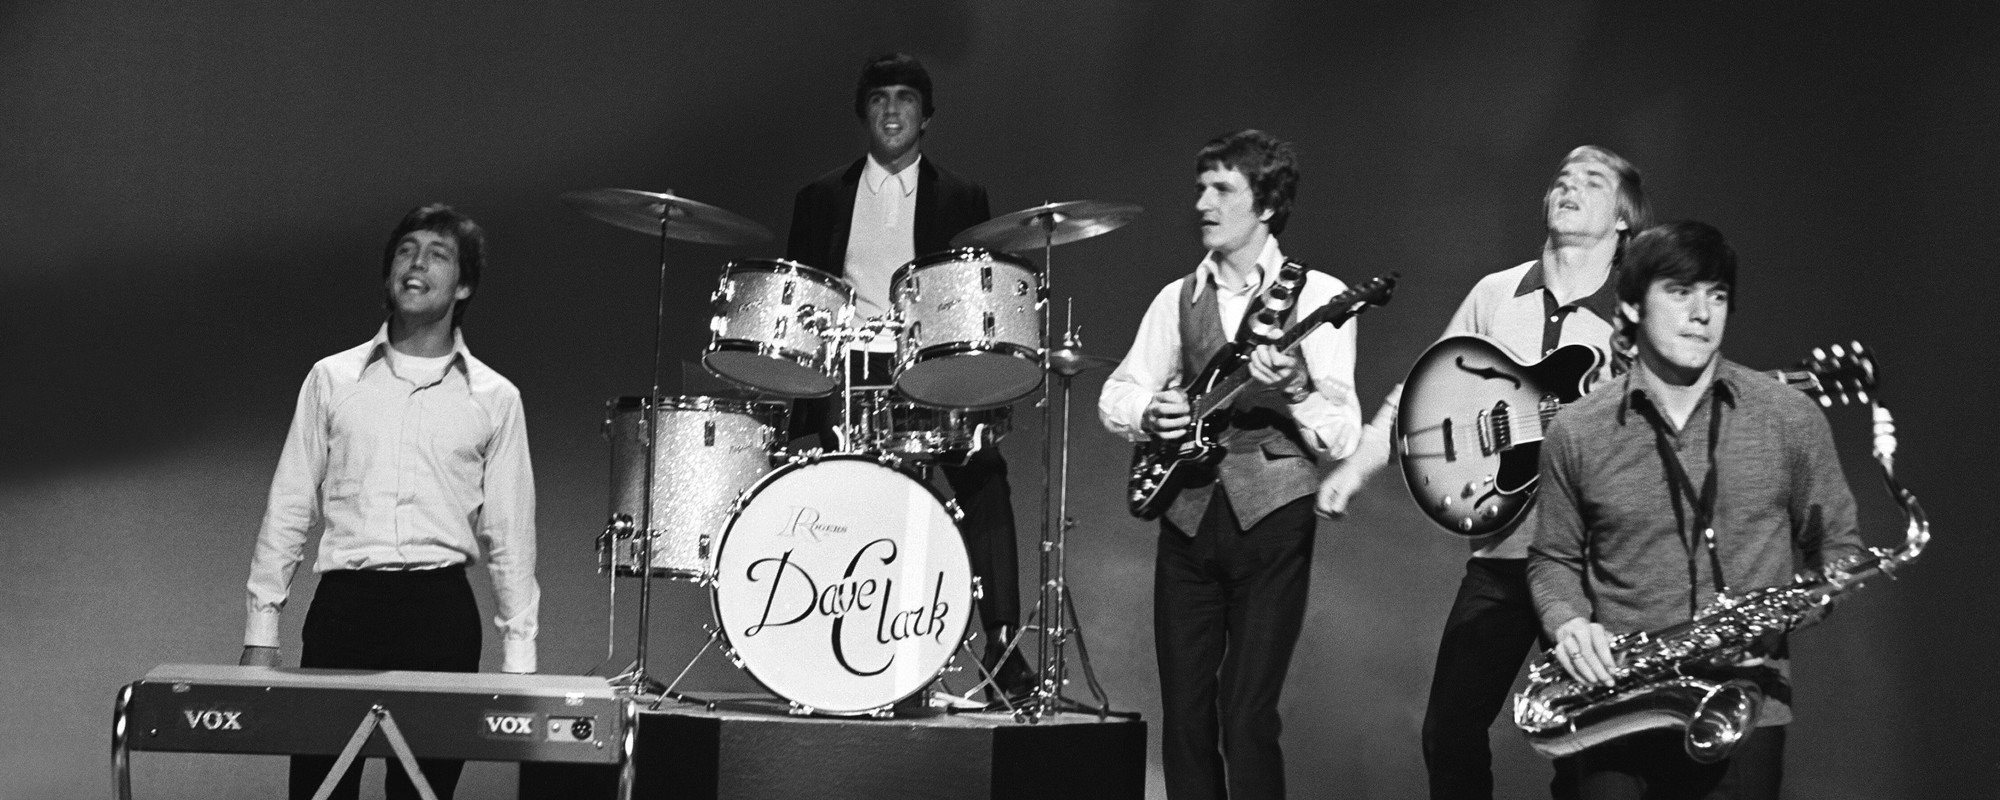 5 Fascinating Facts About The Dave Clark Five and How James Bond Helped the Band Promote Itself